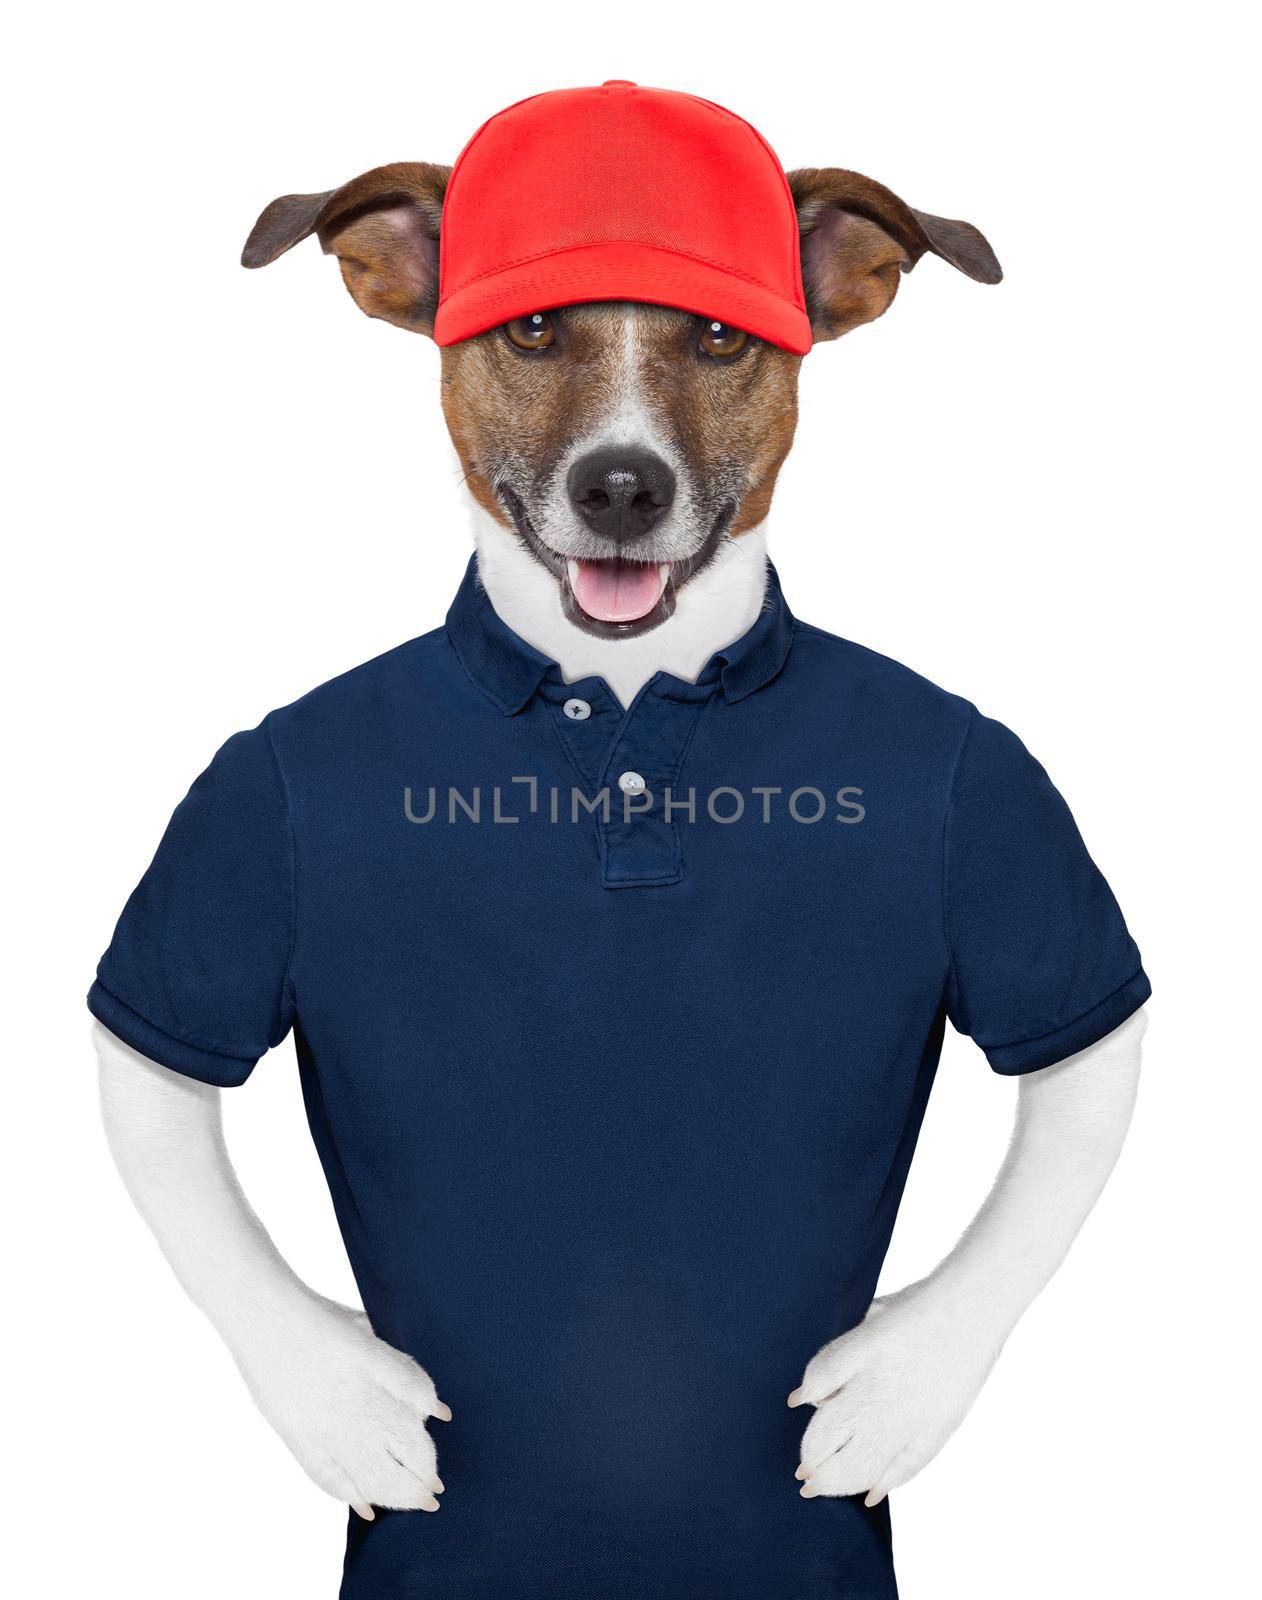 Service dog wearing a blue polo and a red cap